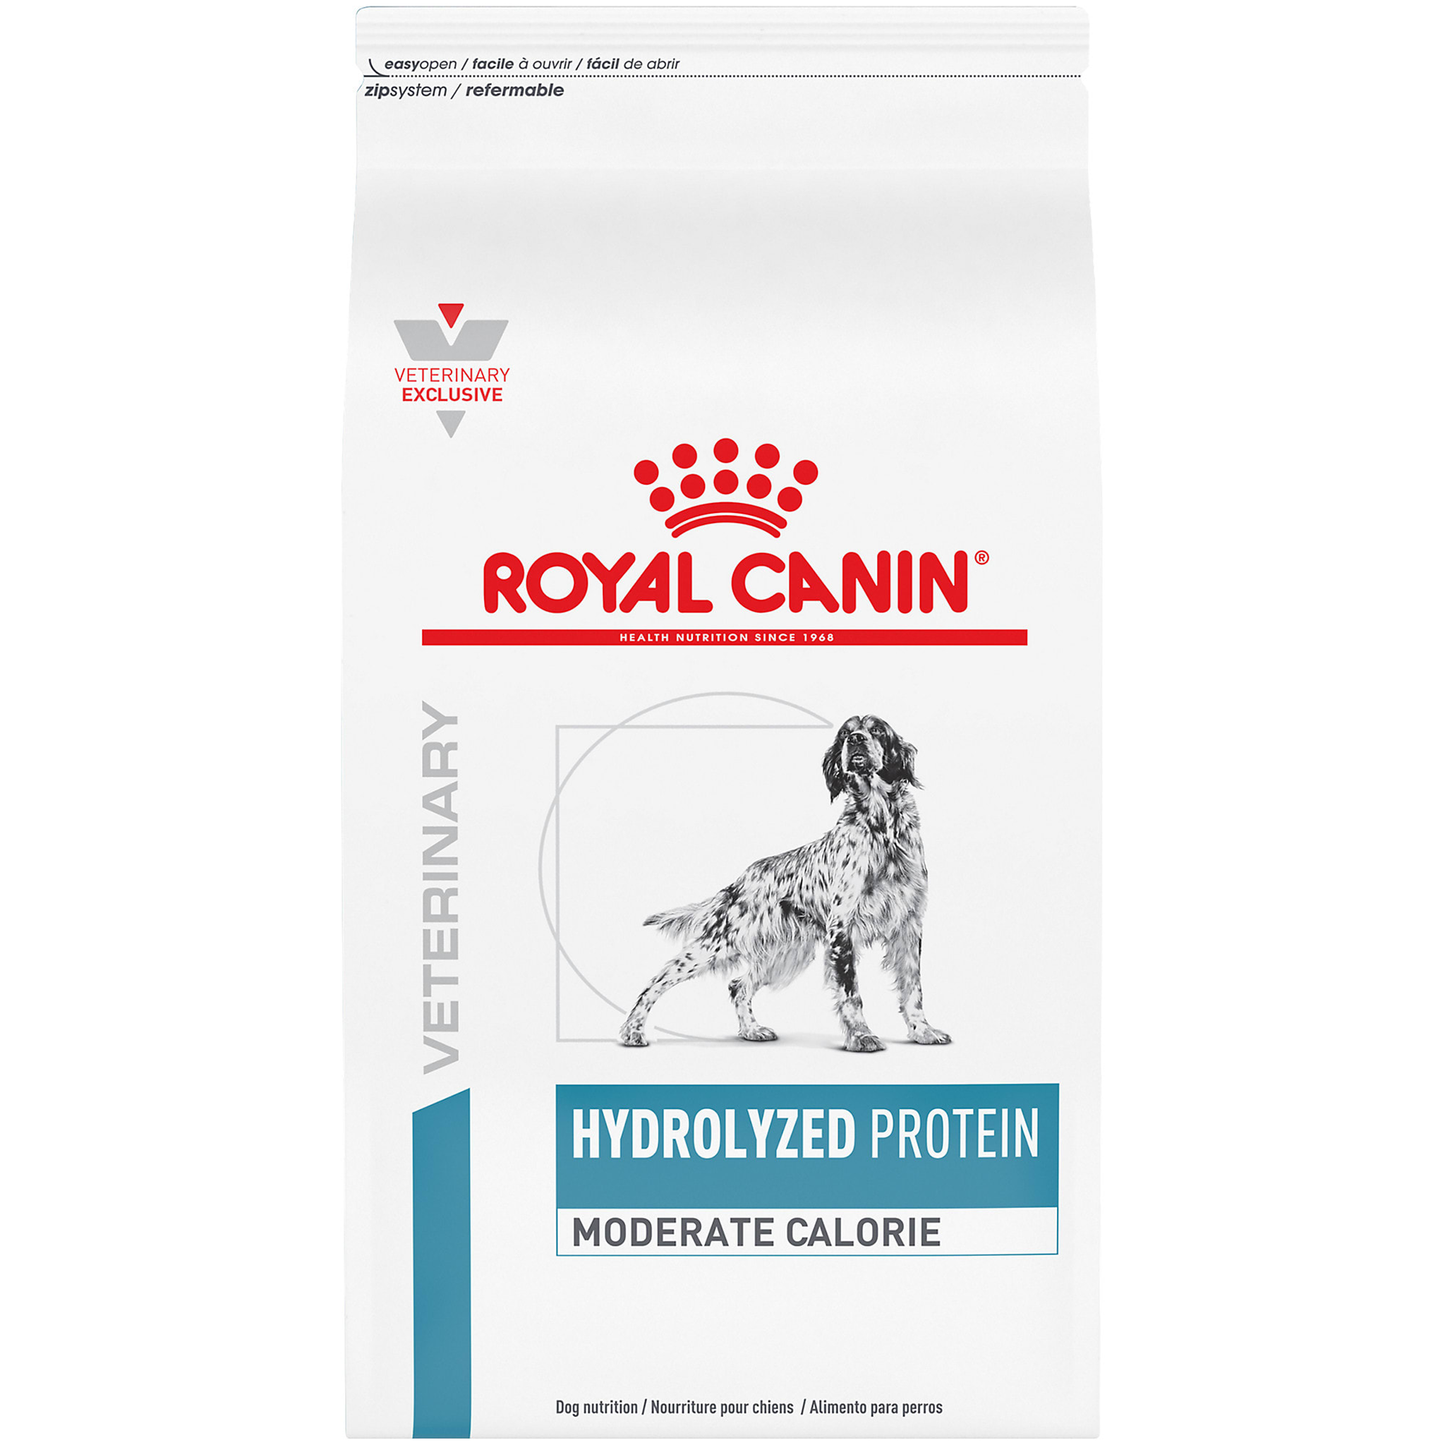 Royal Canin Hydrolyzed Moderate Calorie Canine (7.7lbs bag)